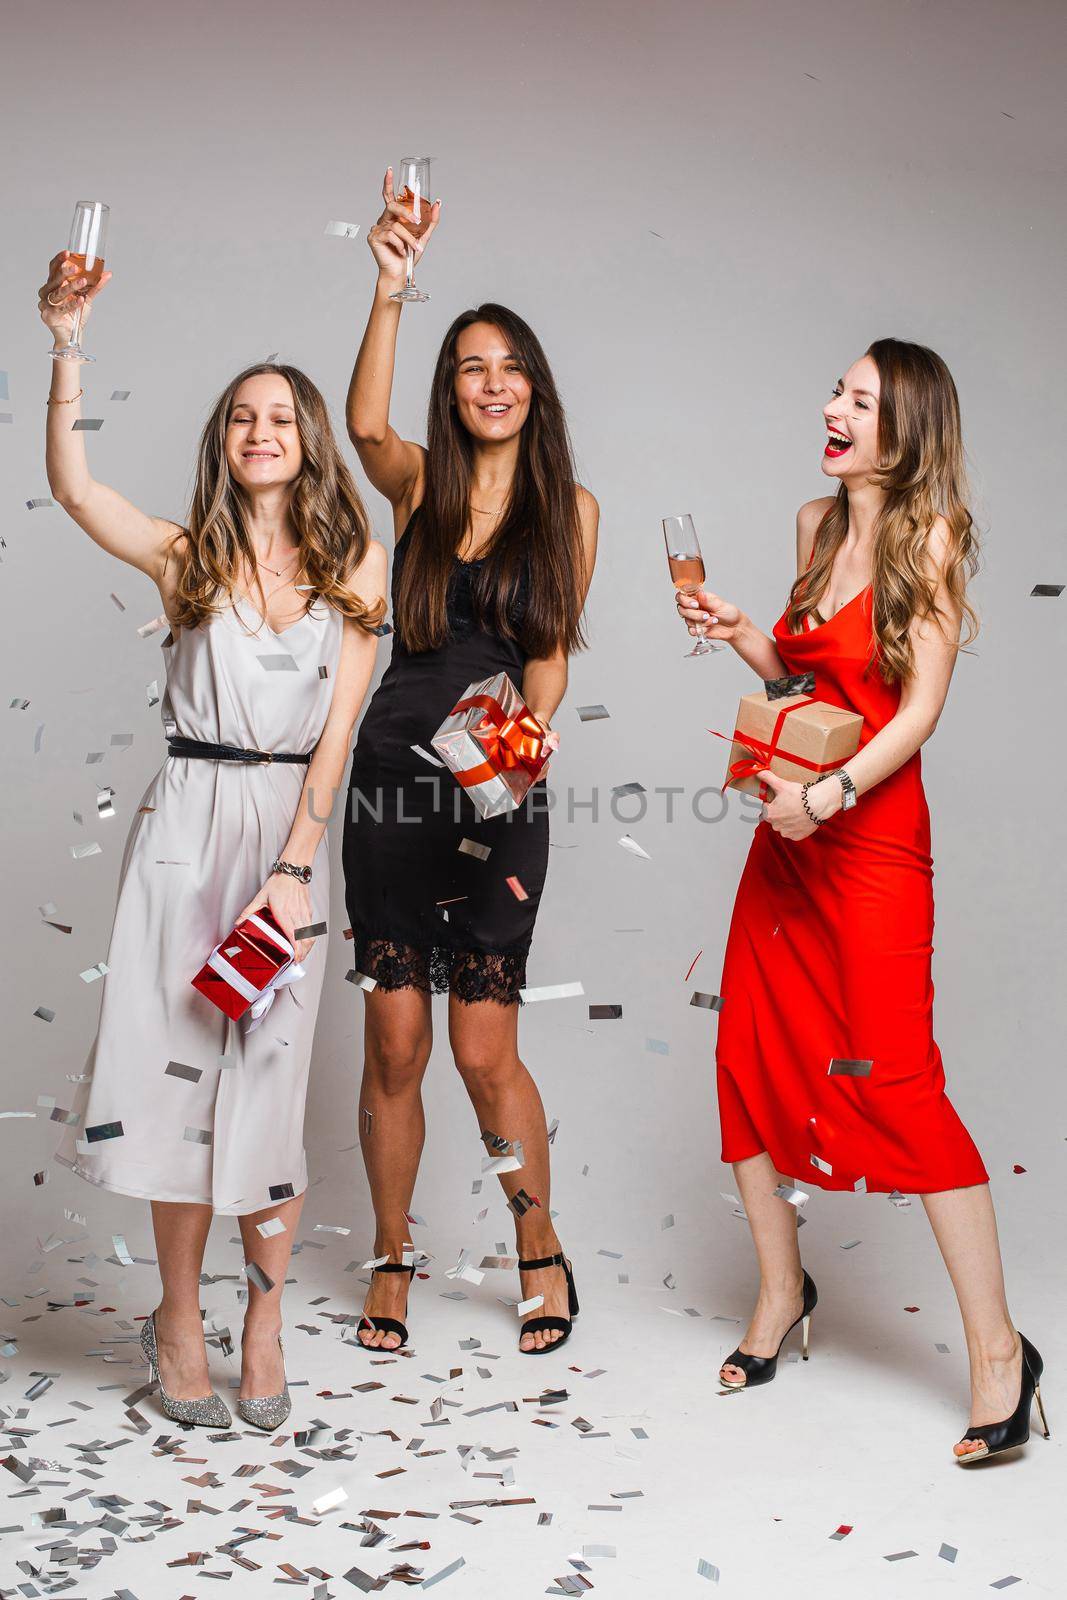 Three girls with drinks having fun under confetti. by StudioLucky